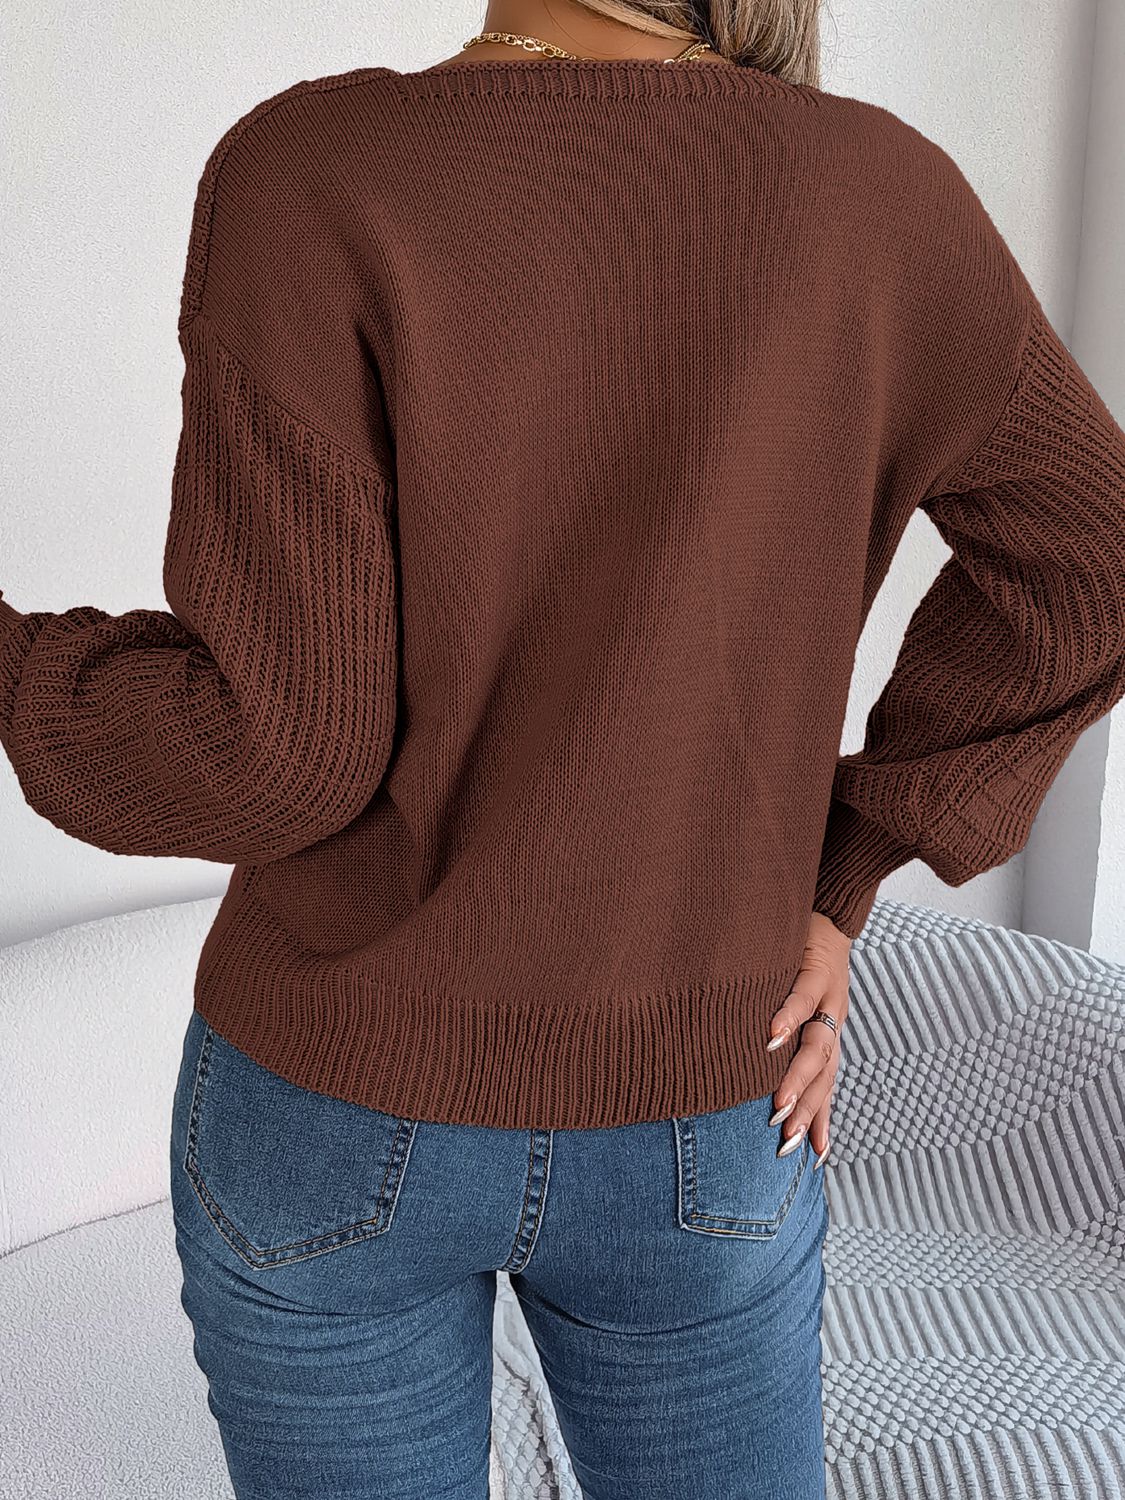 Chic Babe' Square Neck Mixed Knit Sweater 🦋